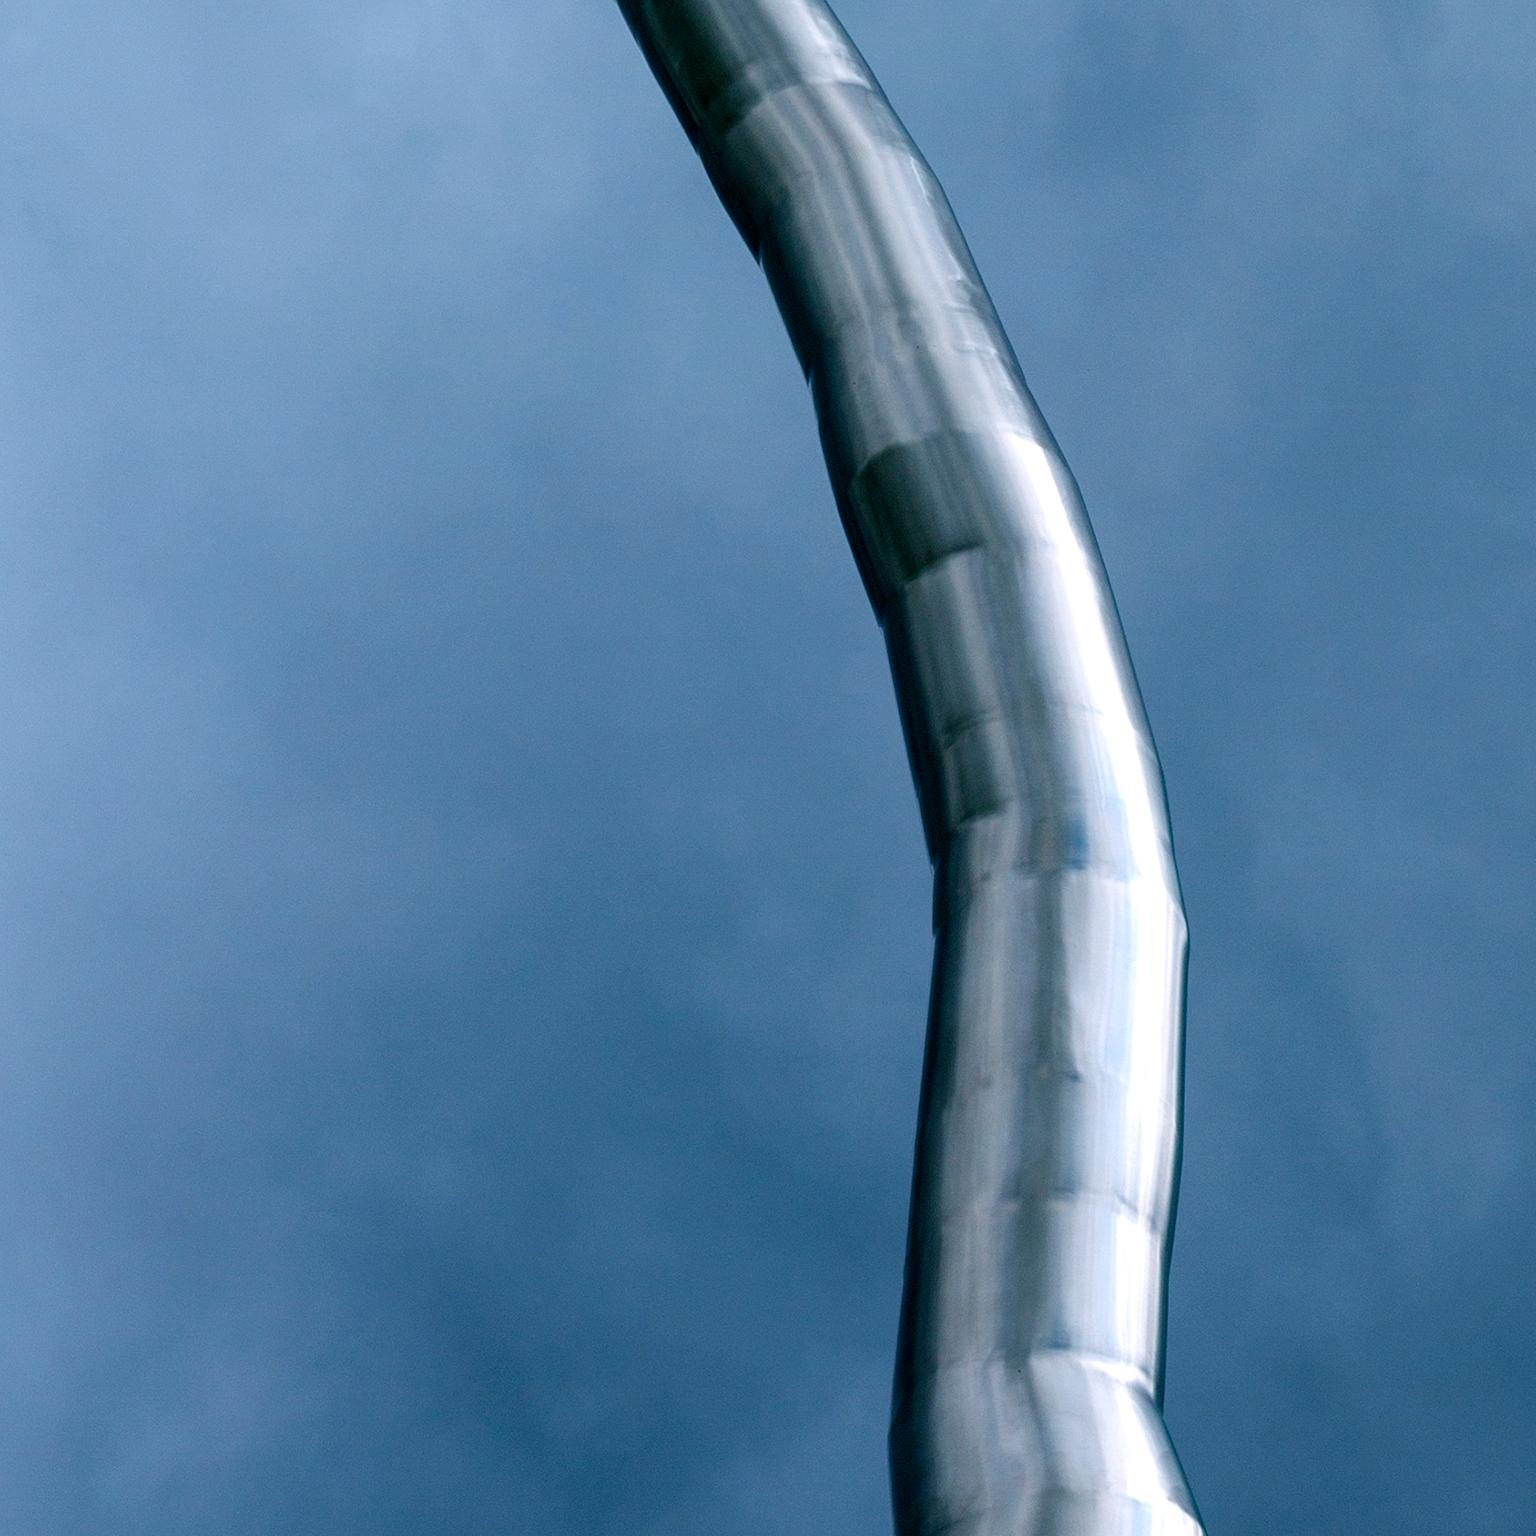 Steel and Sky, Canada, 2015
Photograph by Cosmo Condina. Stainless steel sculpture, Ottawa, Canada, 2015

Archival pigment print 19 X 12.6 in. Edition of 10. This is # 3/10 in the edition.

Colour photograph of stainless steel sculpture “One Hundred